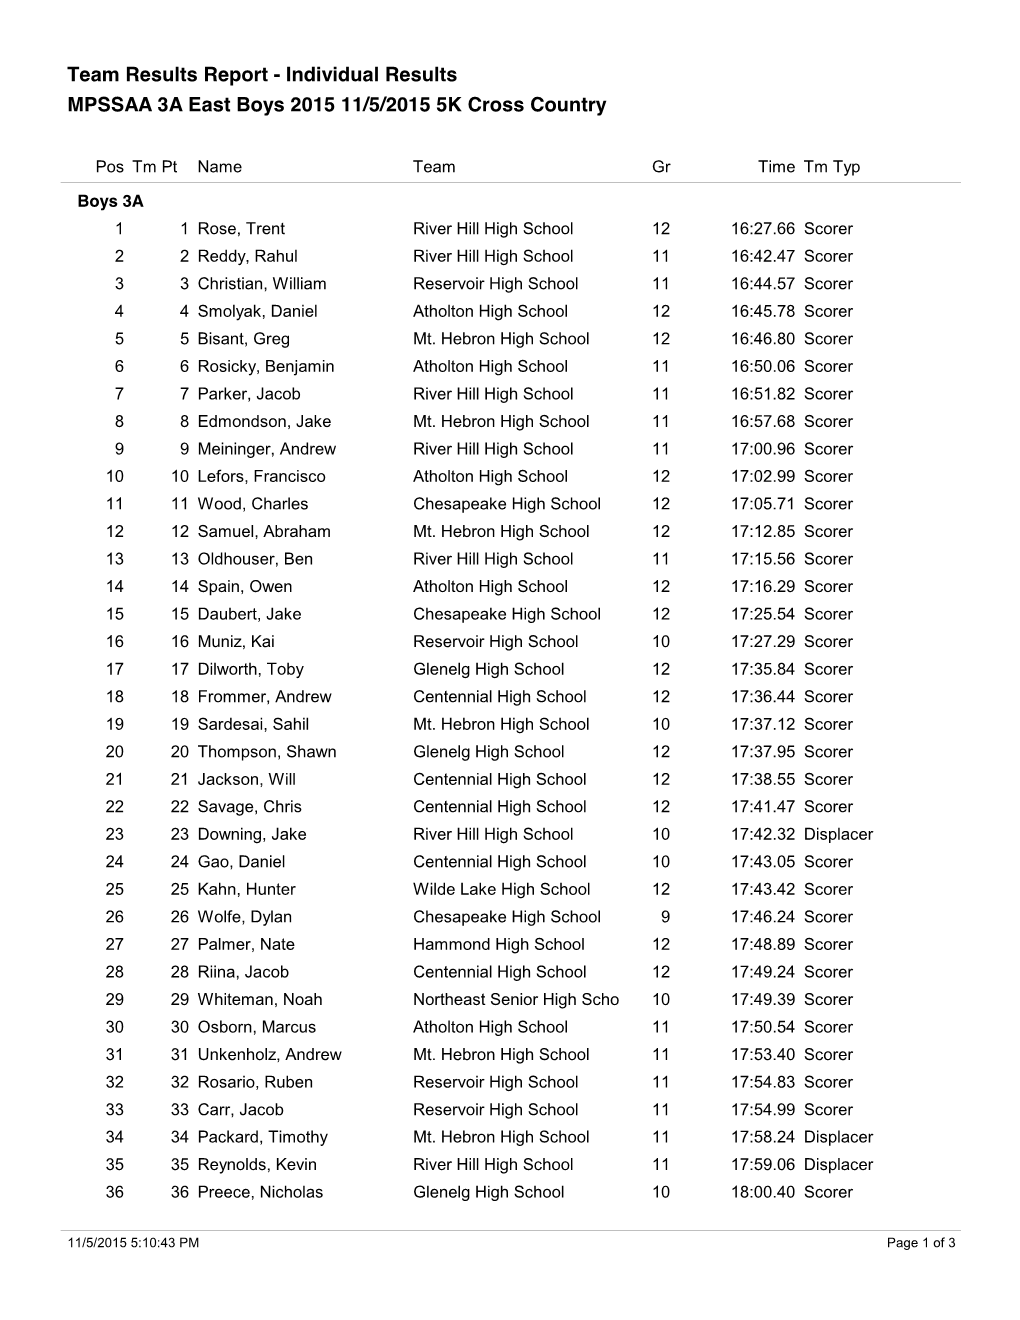 MPSSAA 3A East Boys 2015 11/5/2015 5K Cross Country Team